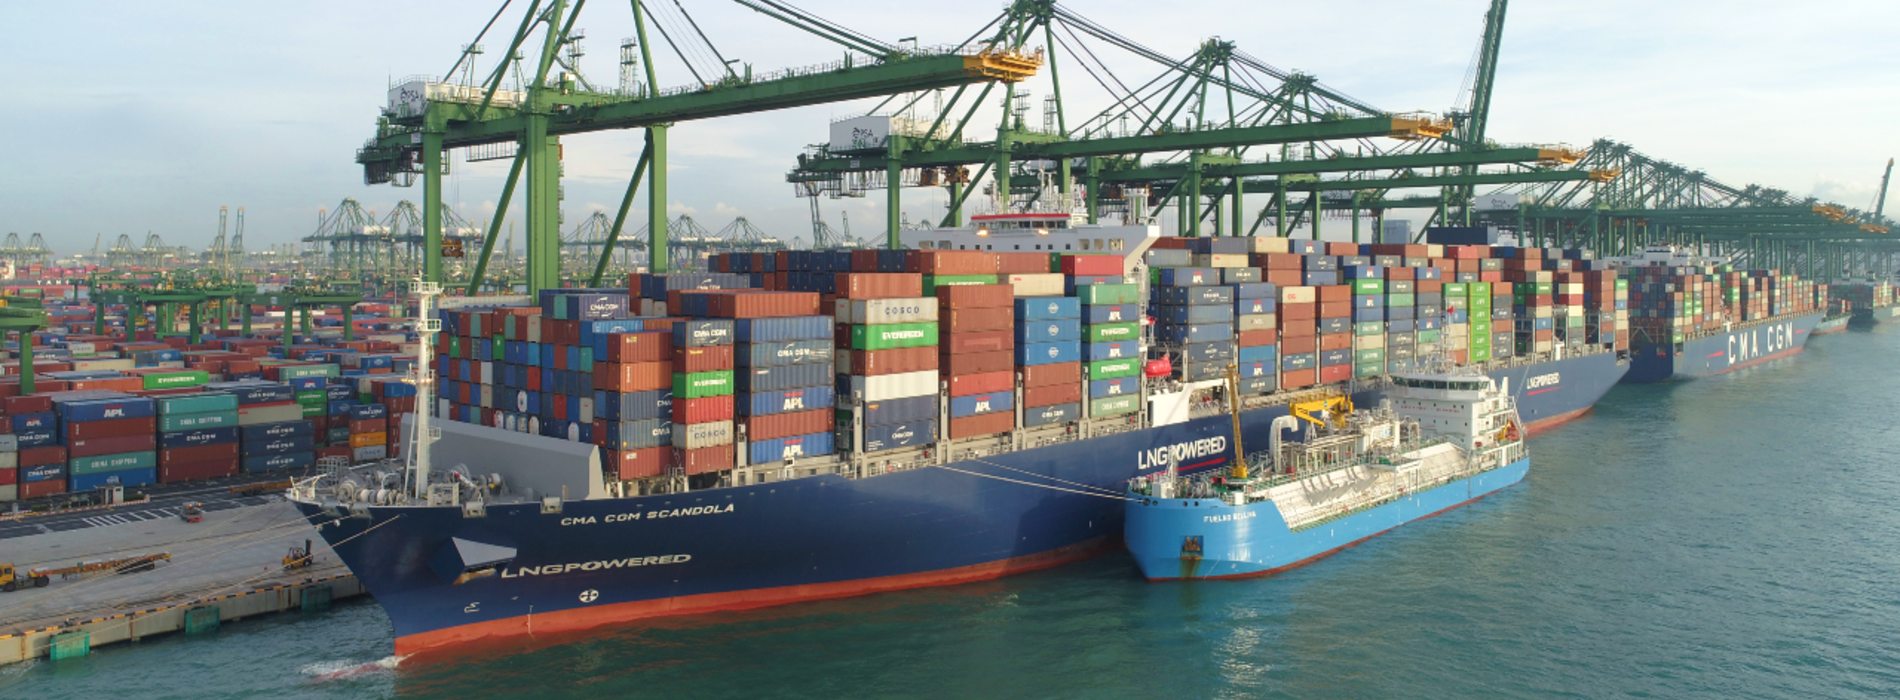 Asia’s First Ship-to-Containership LNG Bunkering undertaken by CMA CGM and FueLNG at the Port of Singapore